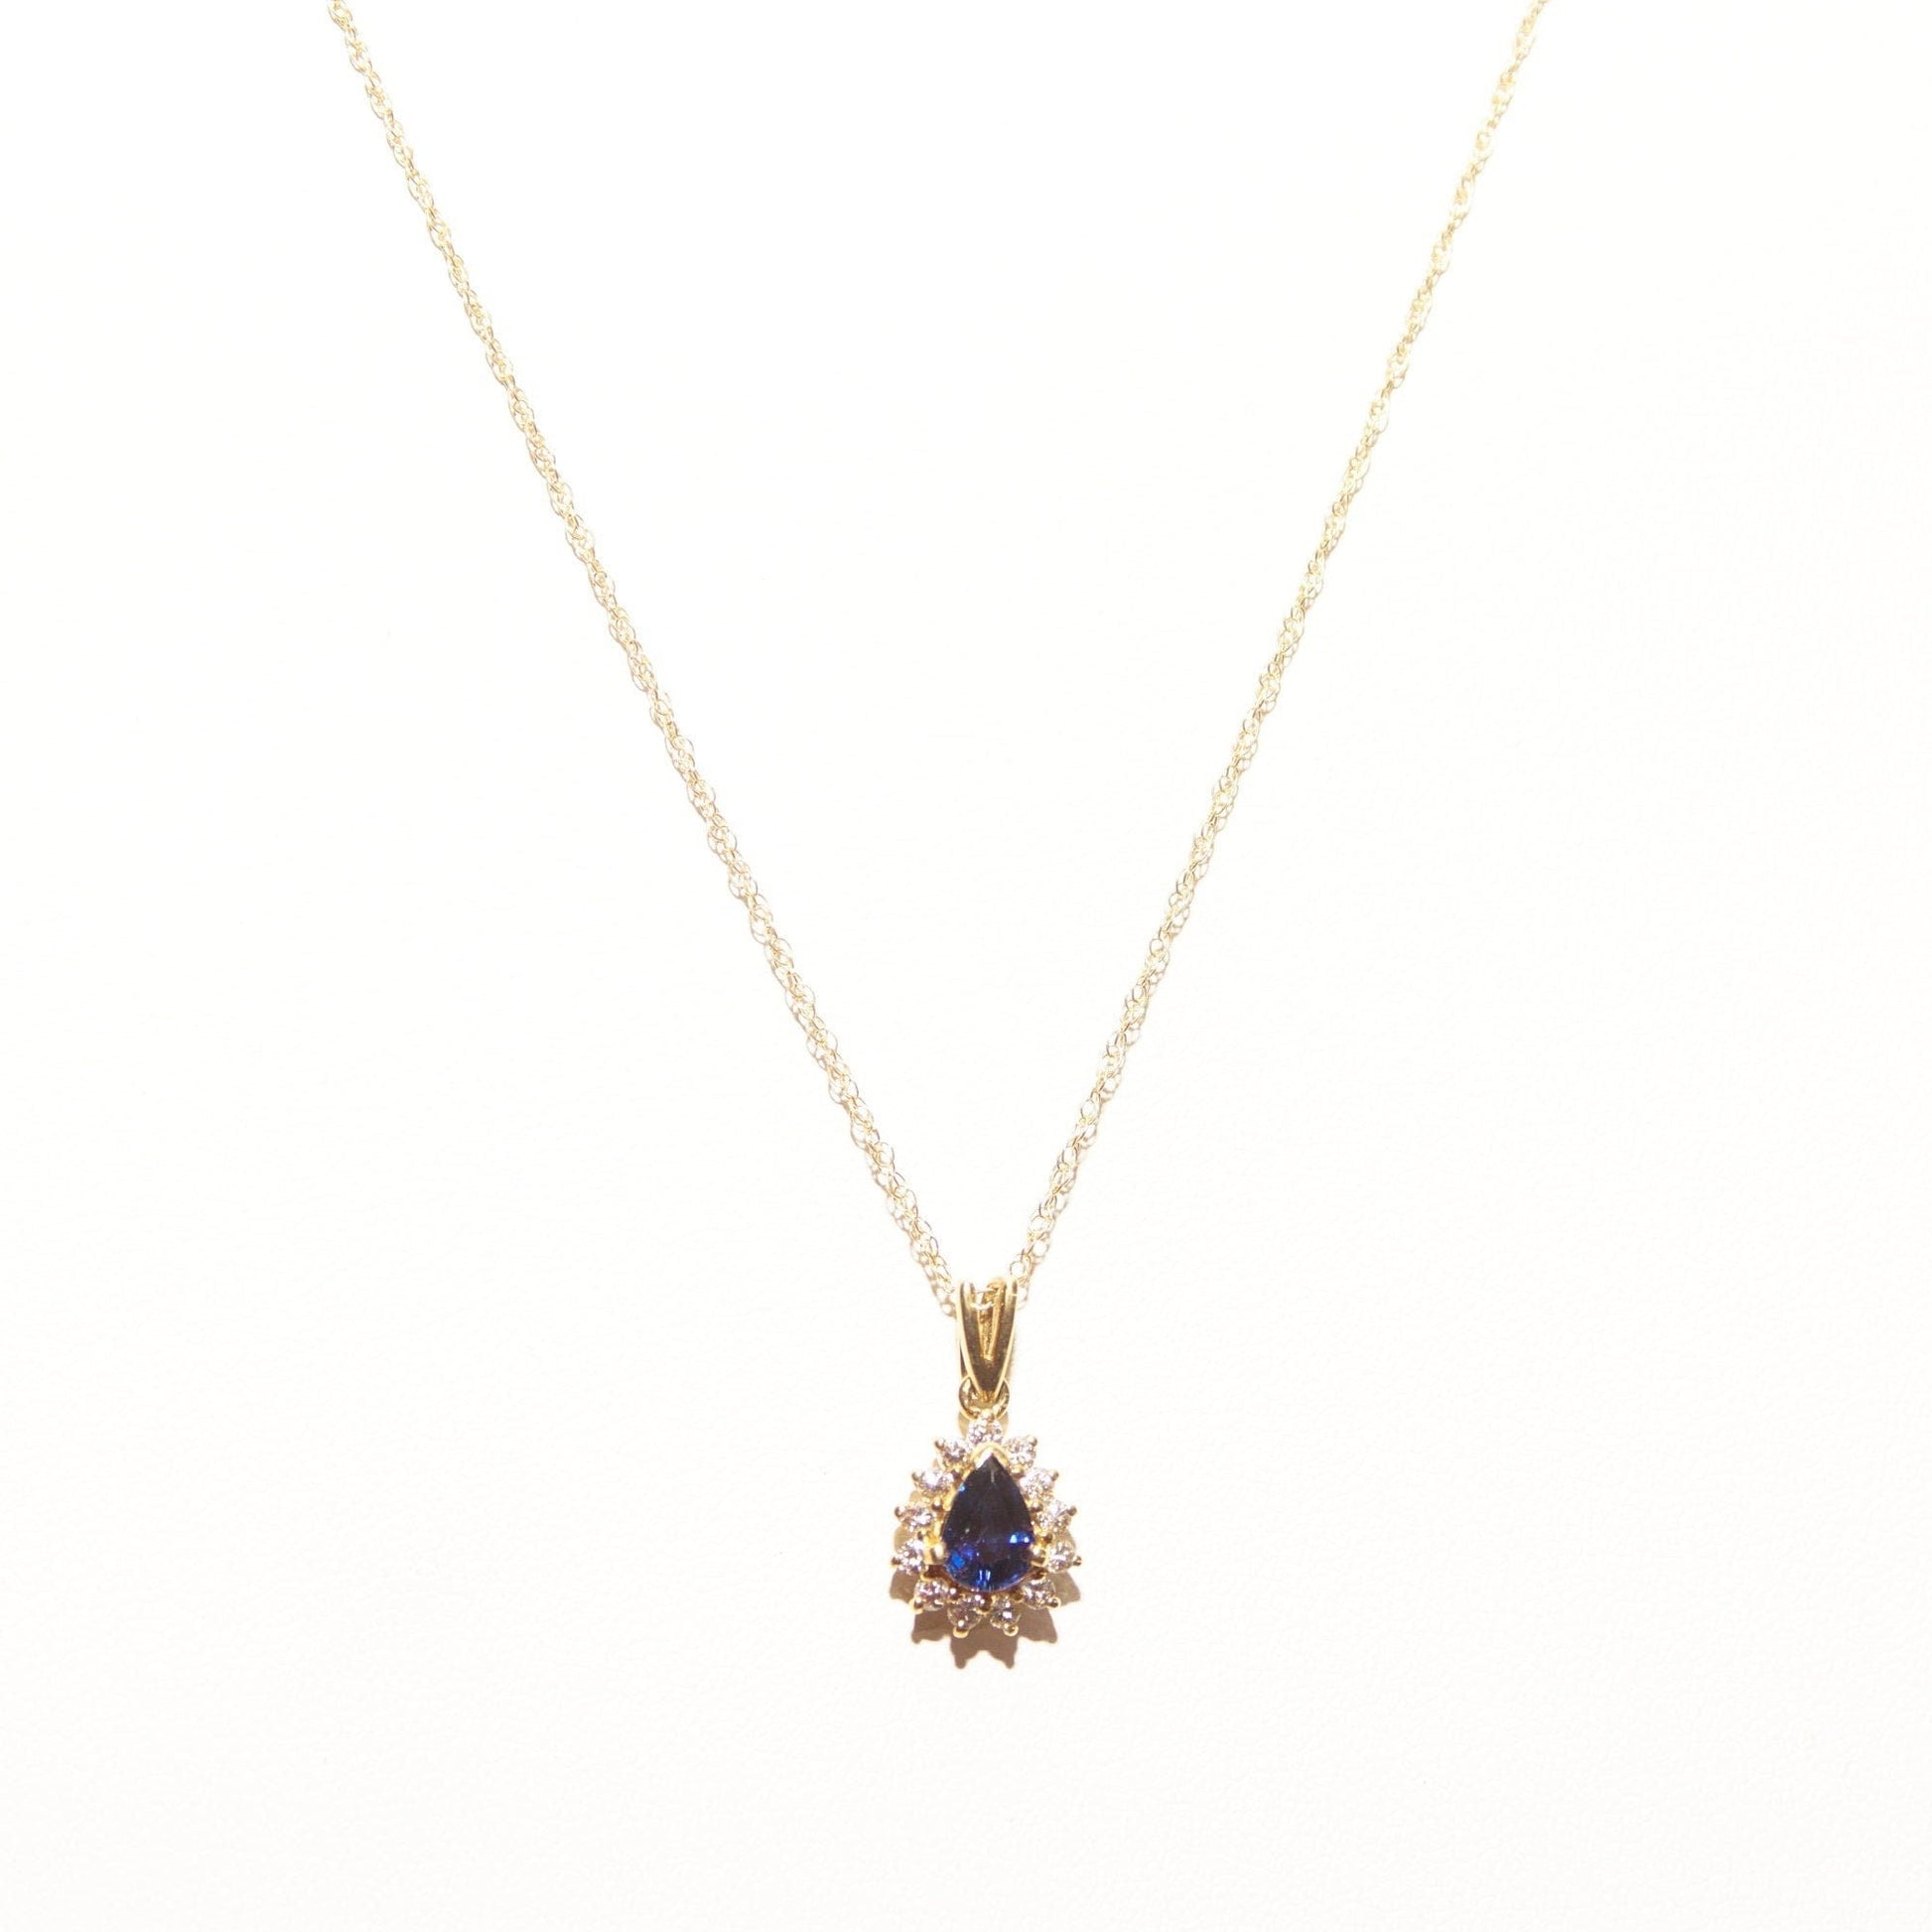 Sapphire Diamond Halo Teardrop Pendant Necklace In 14K Yellow Gold, 1mm Cable Chain, Estate Jewelry, 18 1/2" L - Good's Vintage